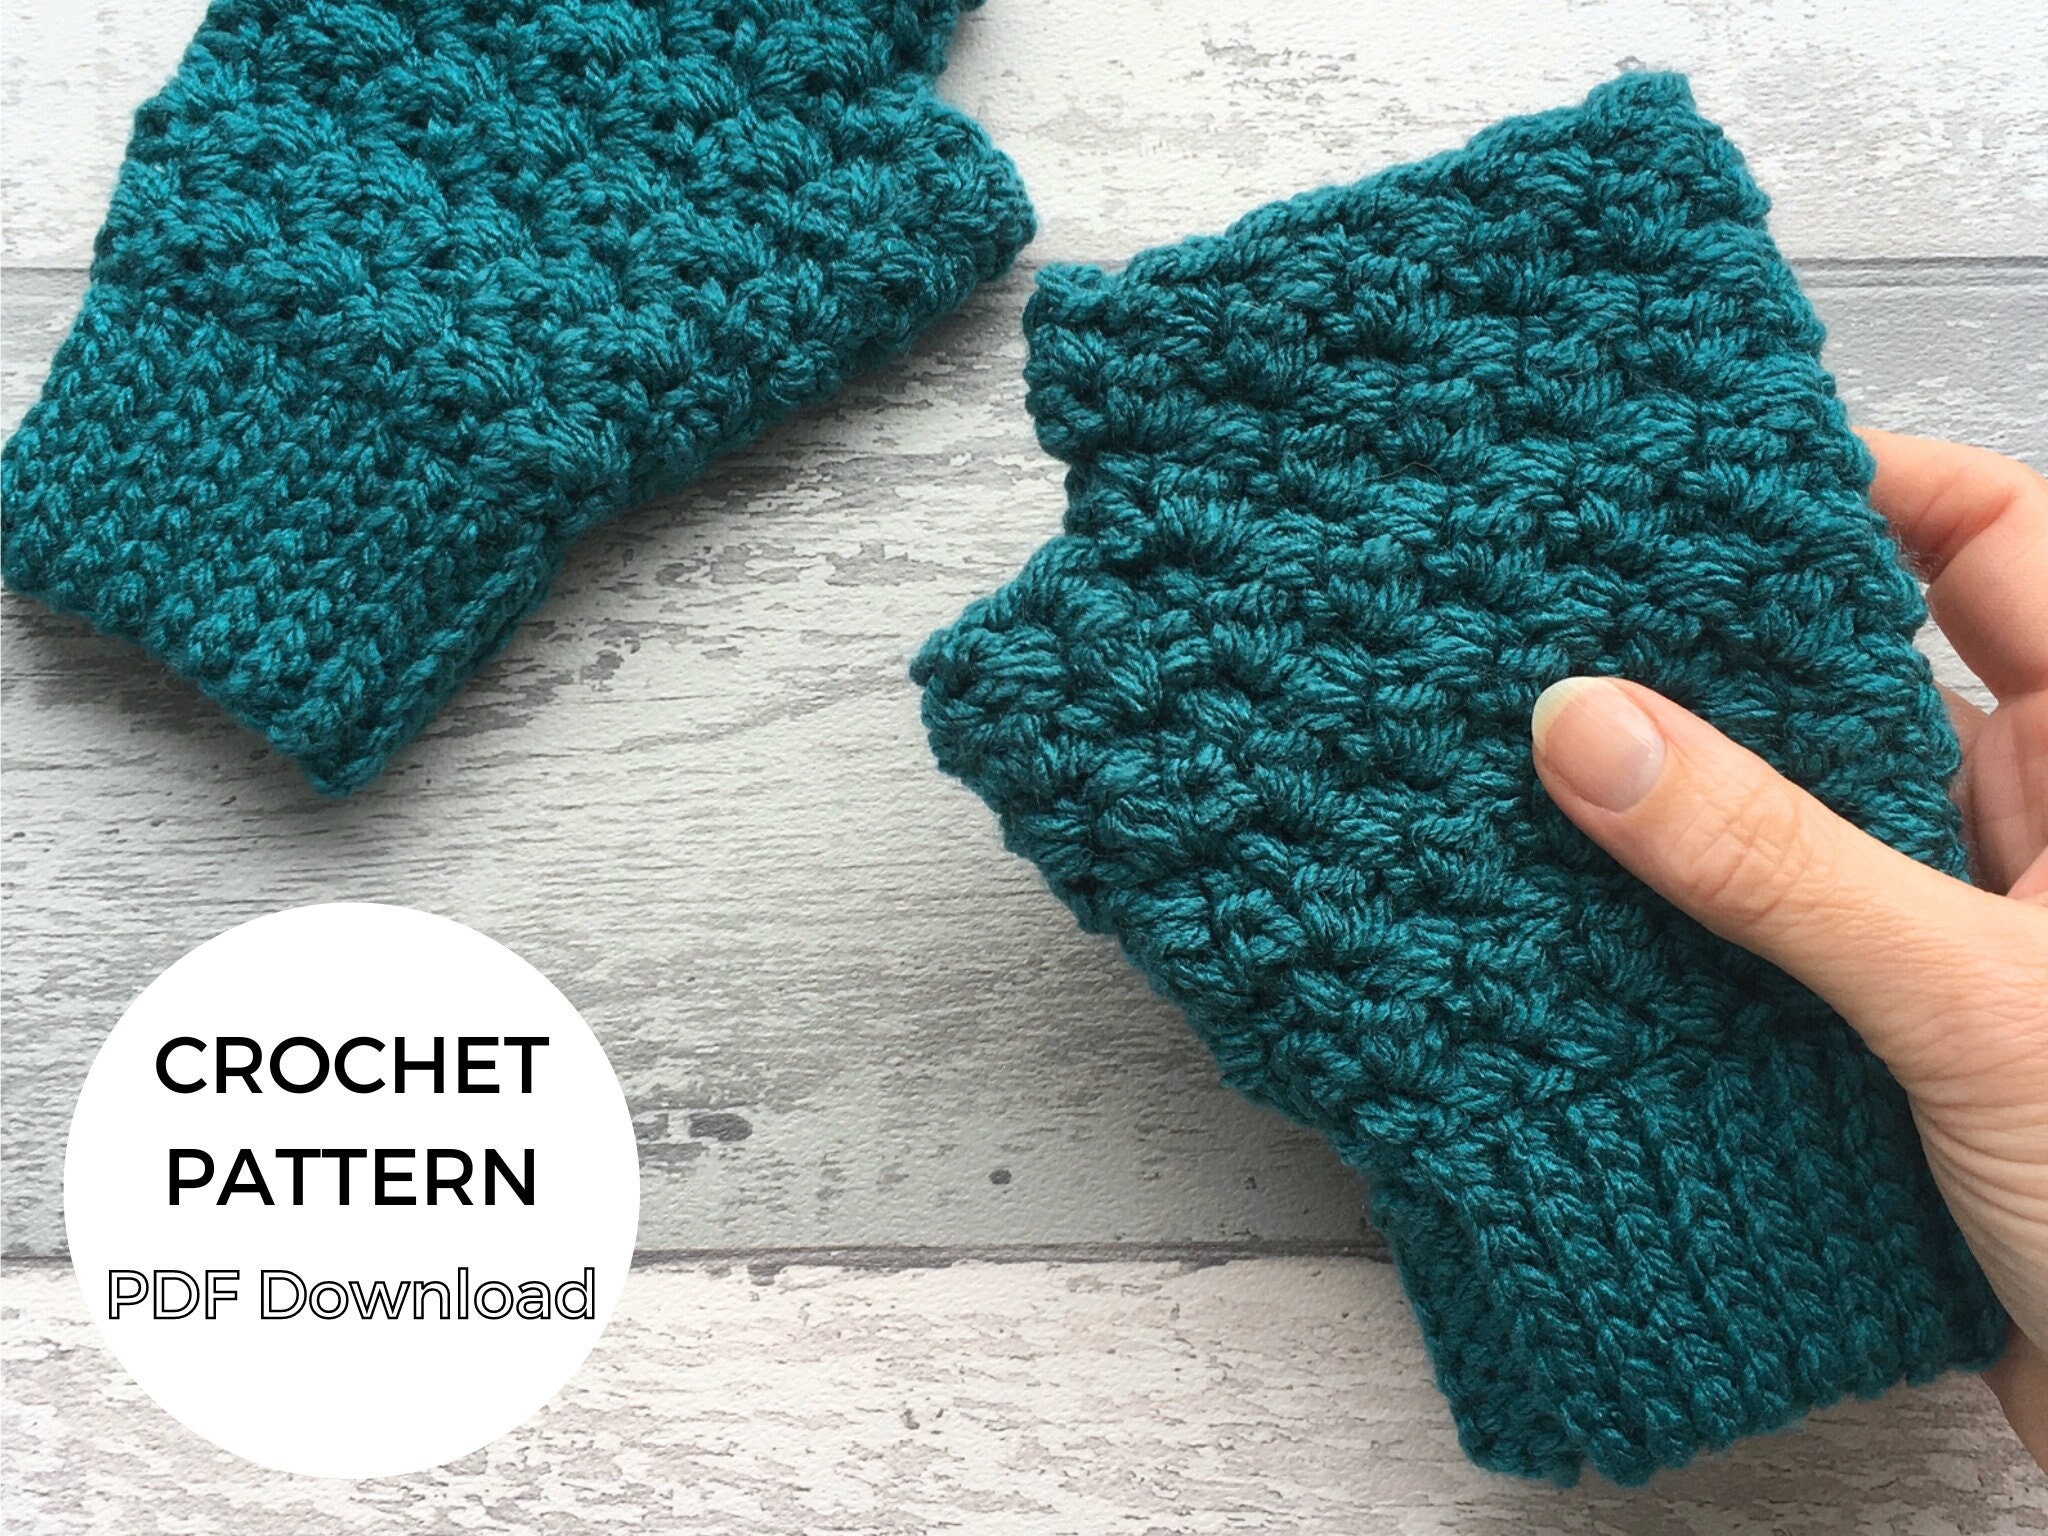 How to Crochet the Suzette Stitch (Easy Tutorial & Pattern) - Daisy Cottage  Designs